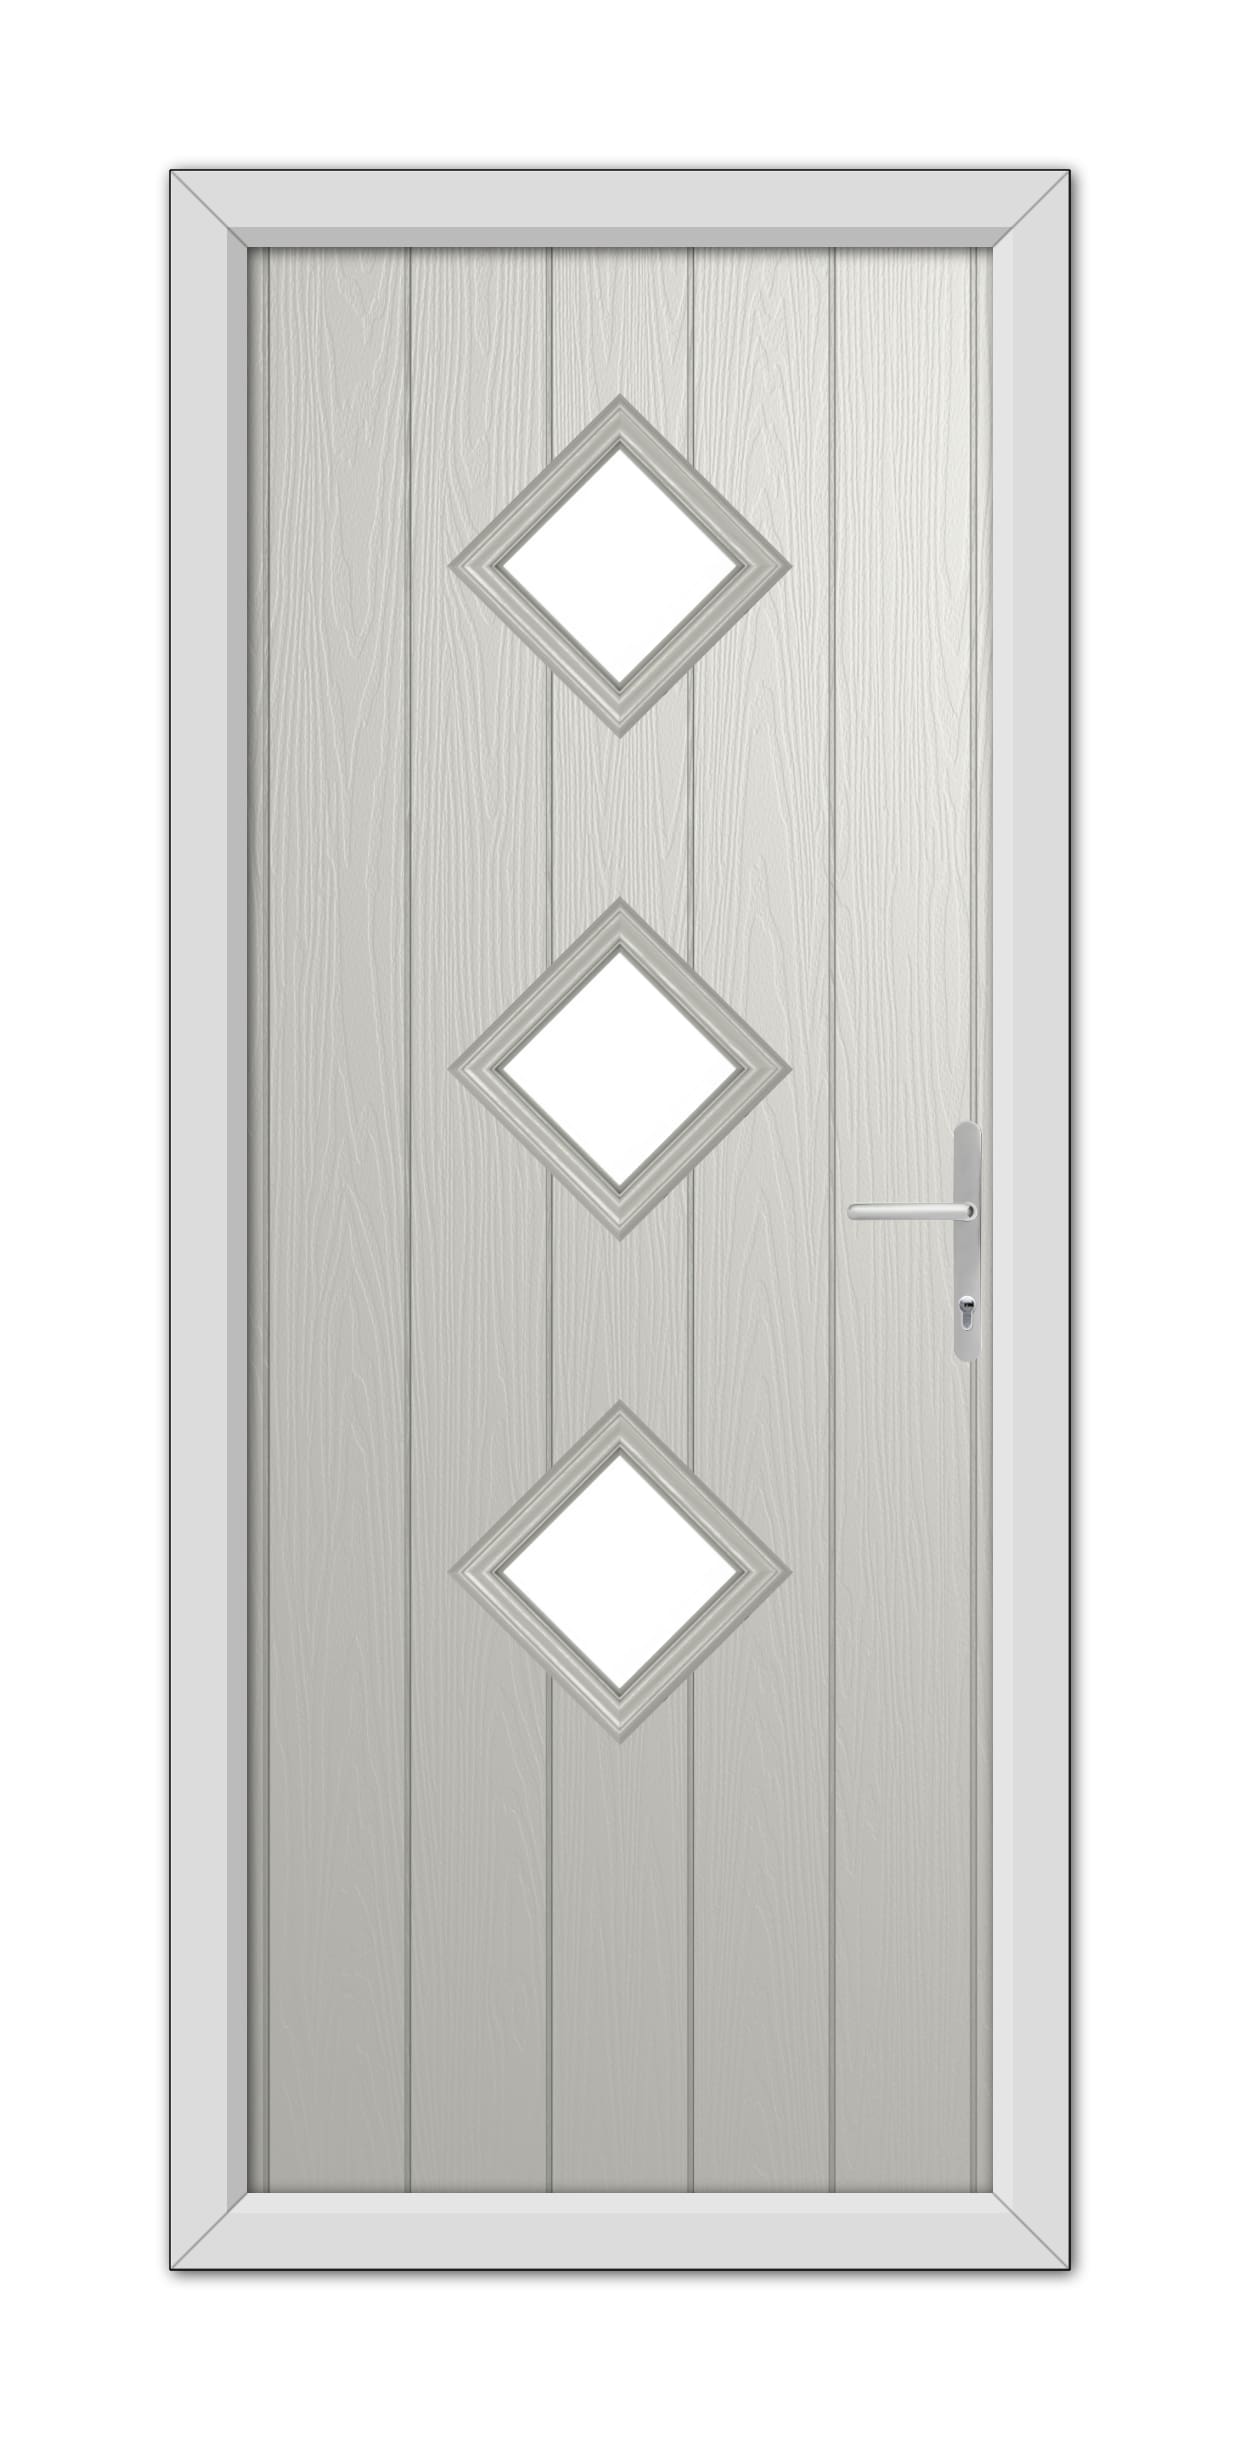 A modern Agate Grey Richmond Composite Door 48mm Timber Core featuring three diamond-shaped windows and a metallic handle, set in a simple frame.